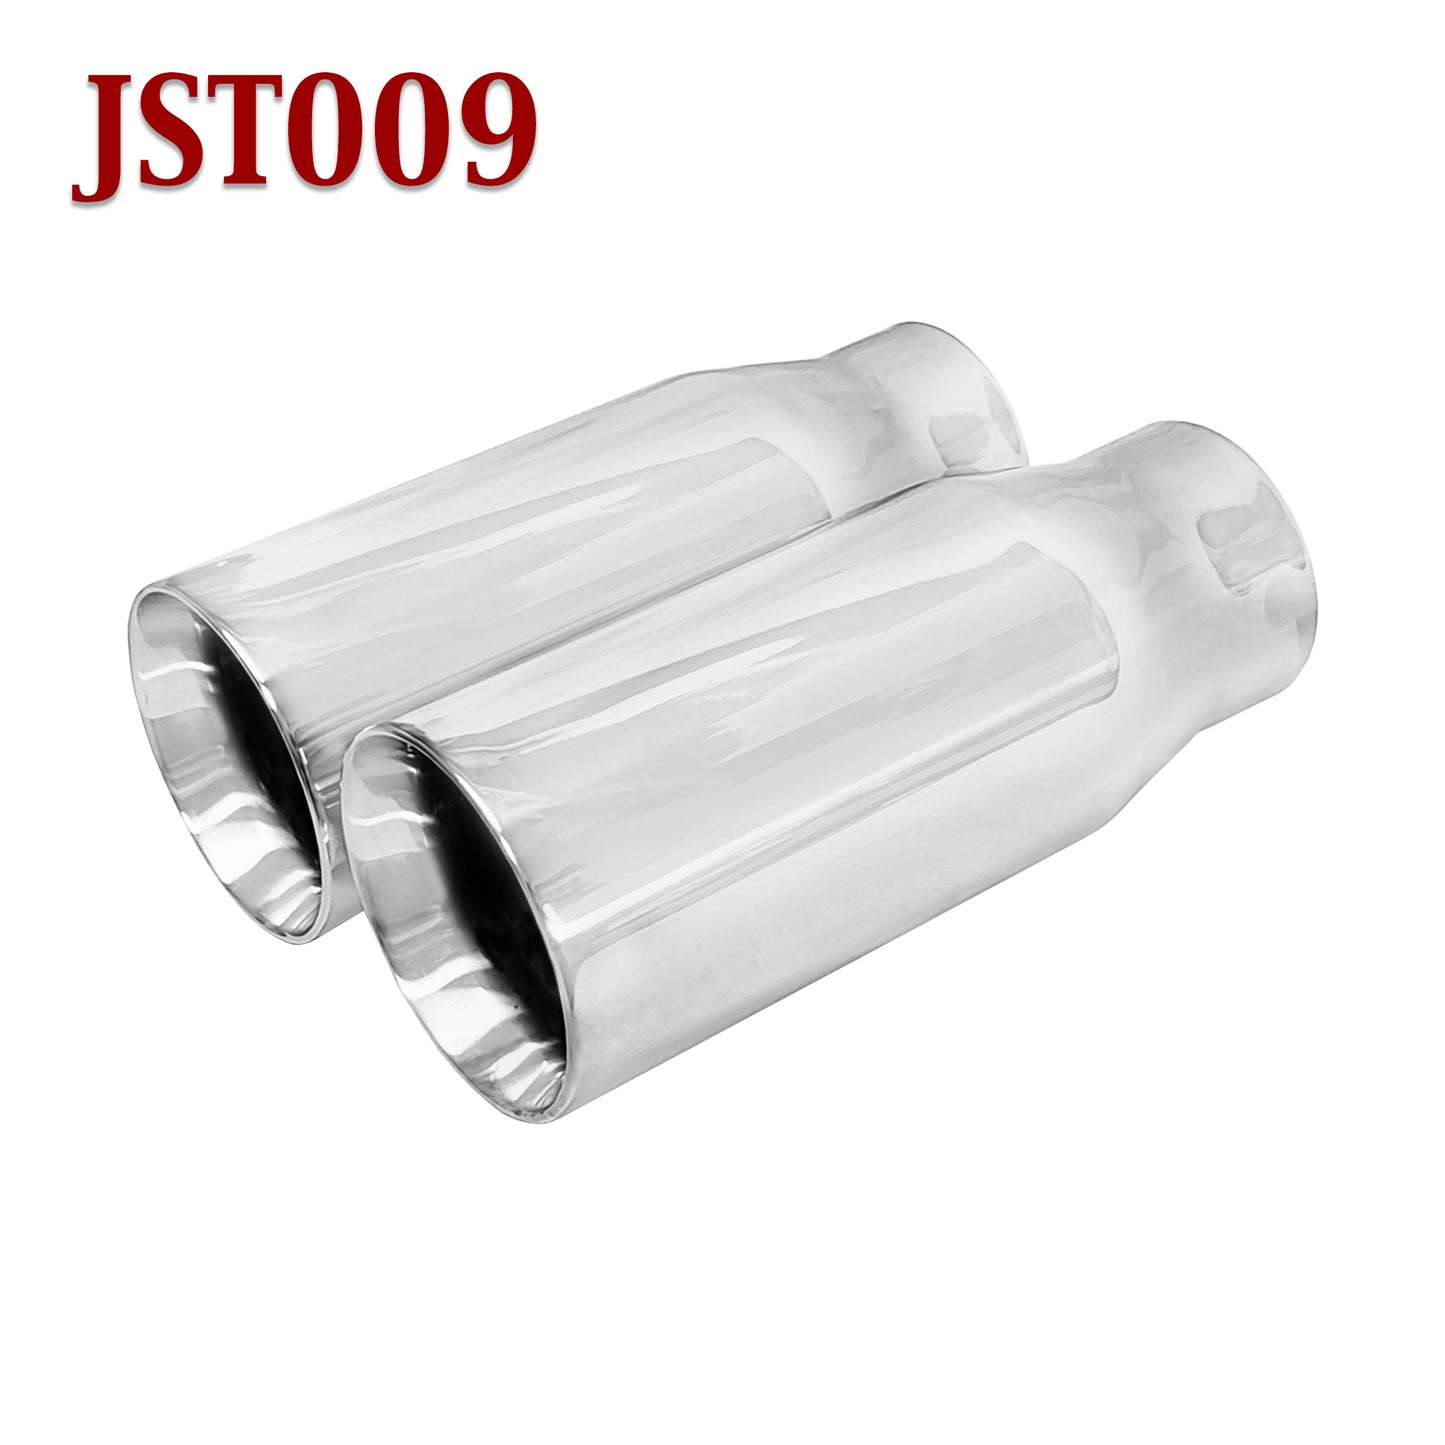 JST009 2.25" Stainless Round Exhaust Tip 2 1/4" Inlet / 3" Outlet / 7" Long